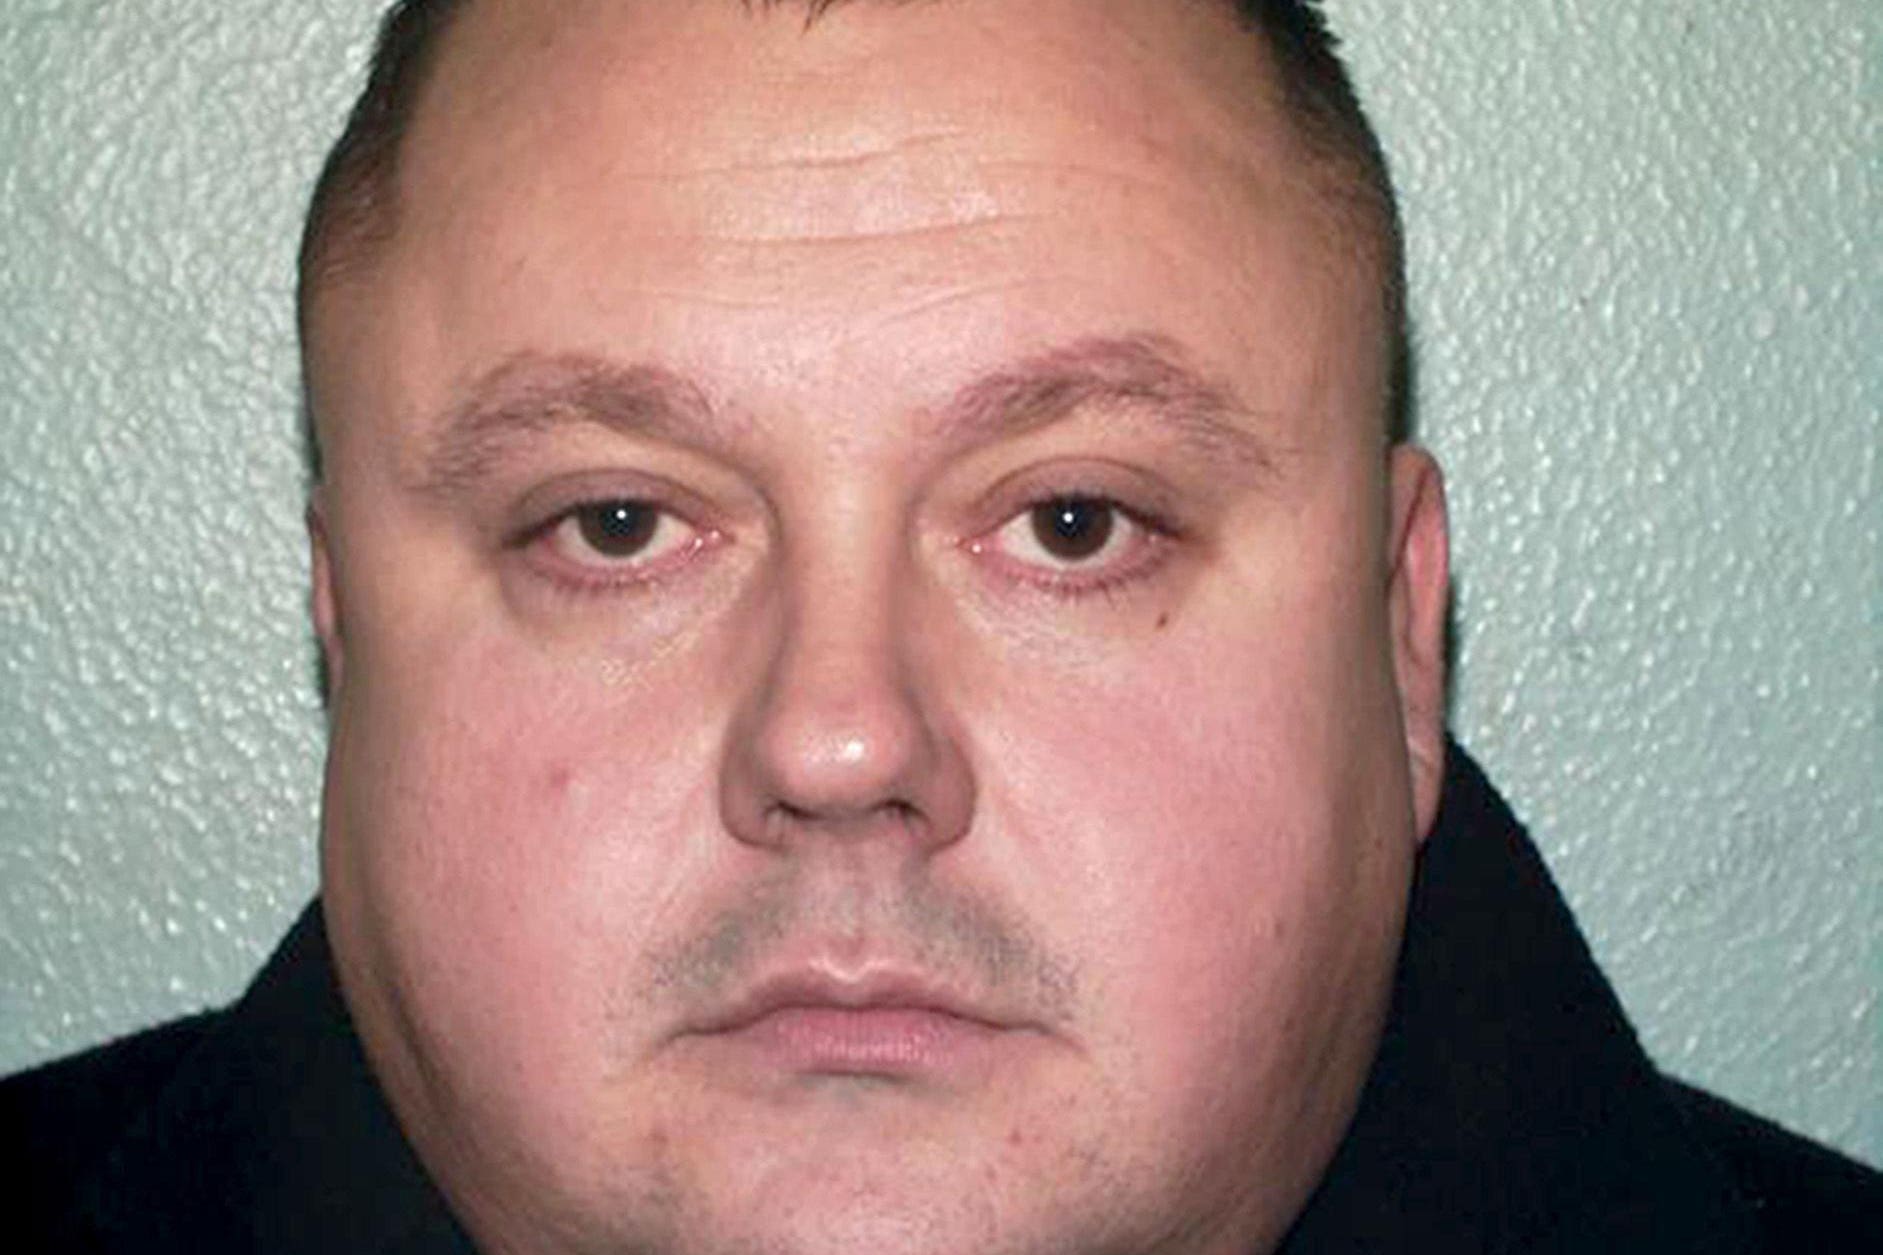 Levi Bellfield also refused to attend court for murdering Milly Dowler